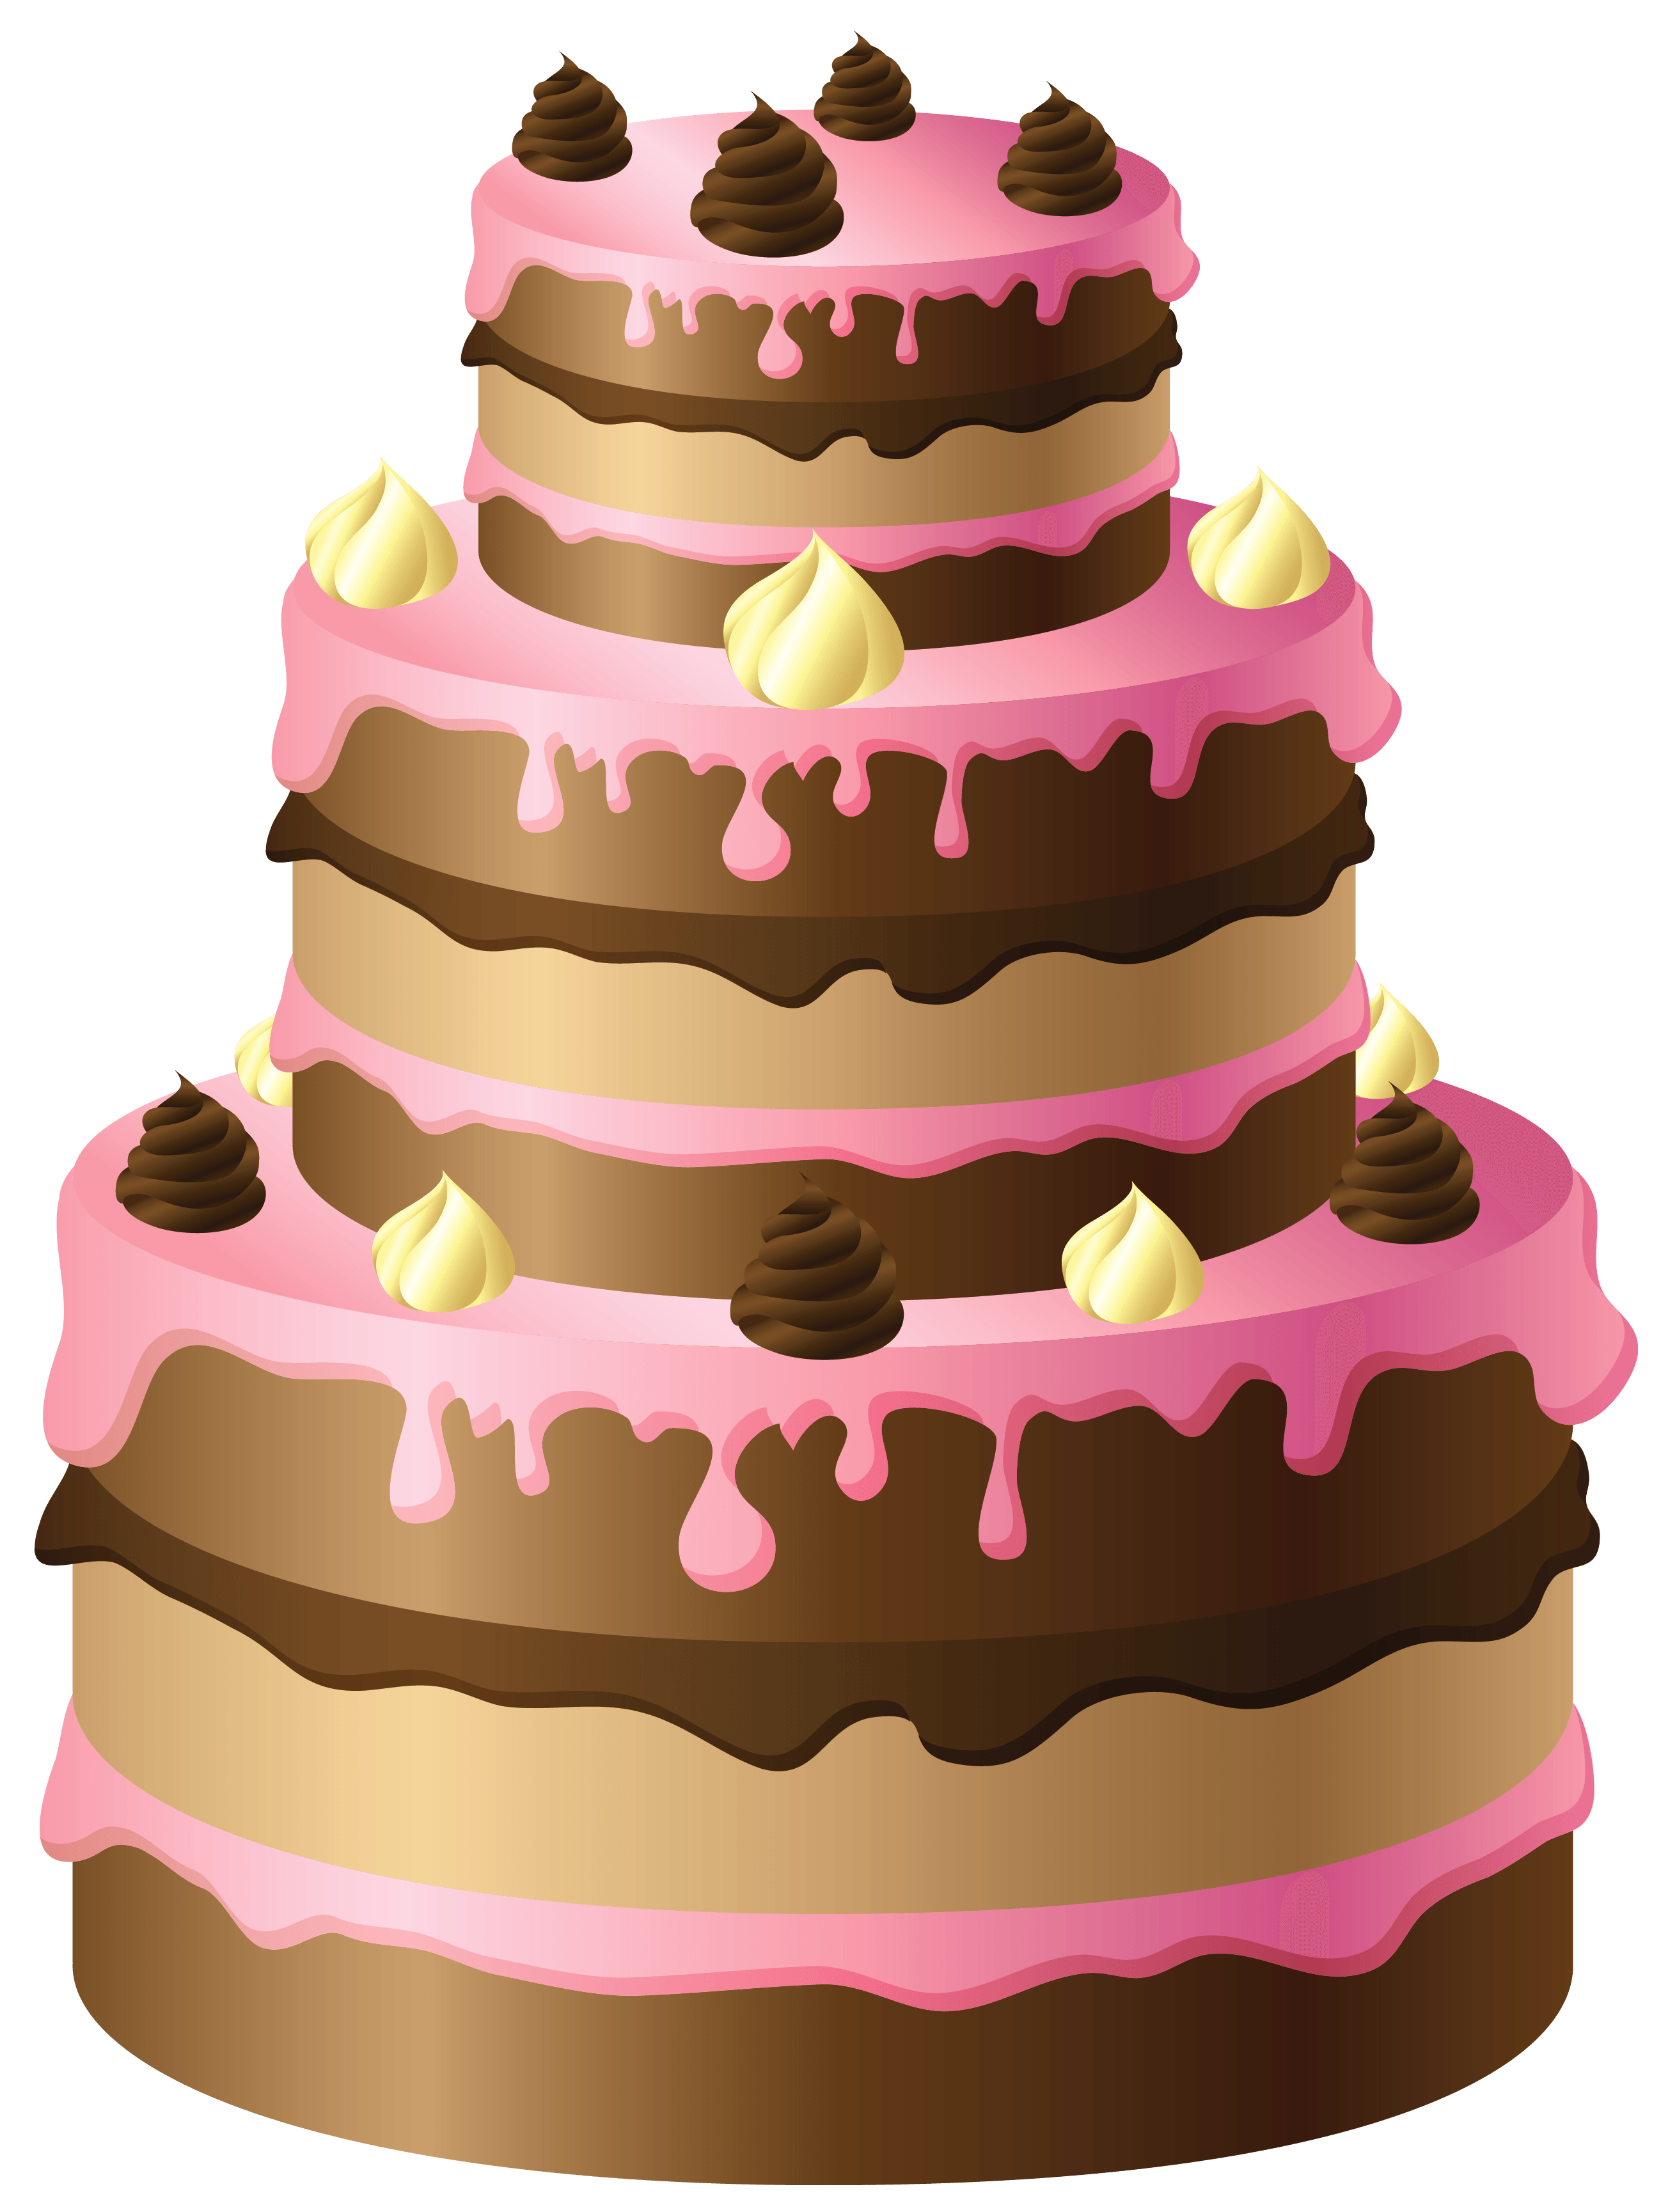 Cake pictures clip art